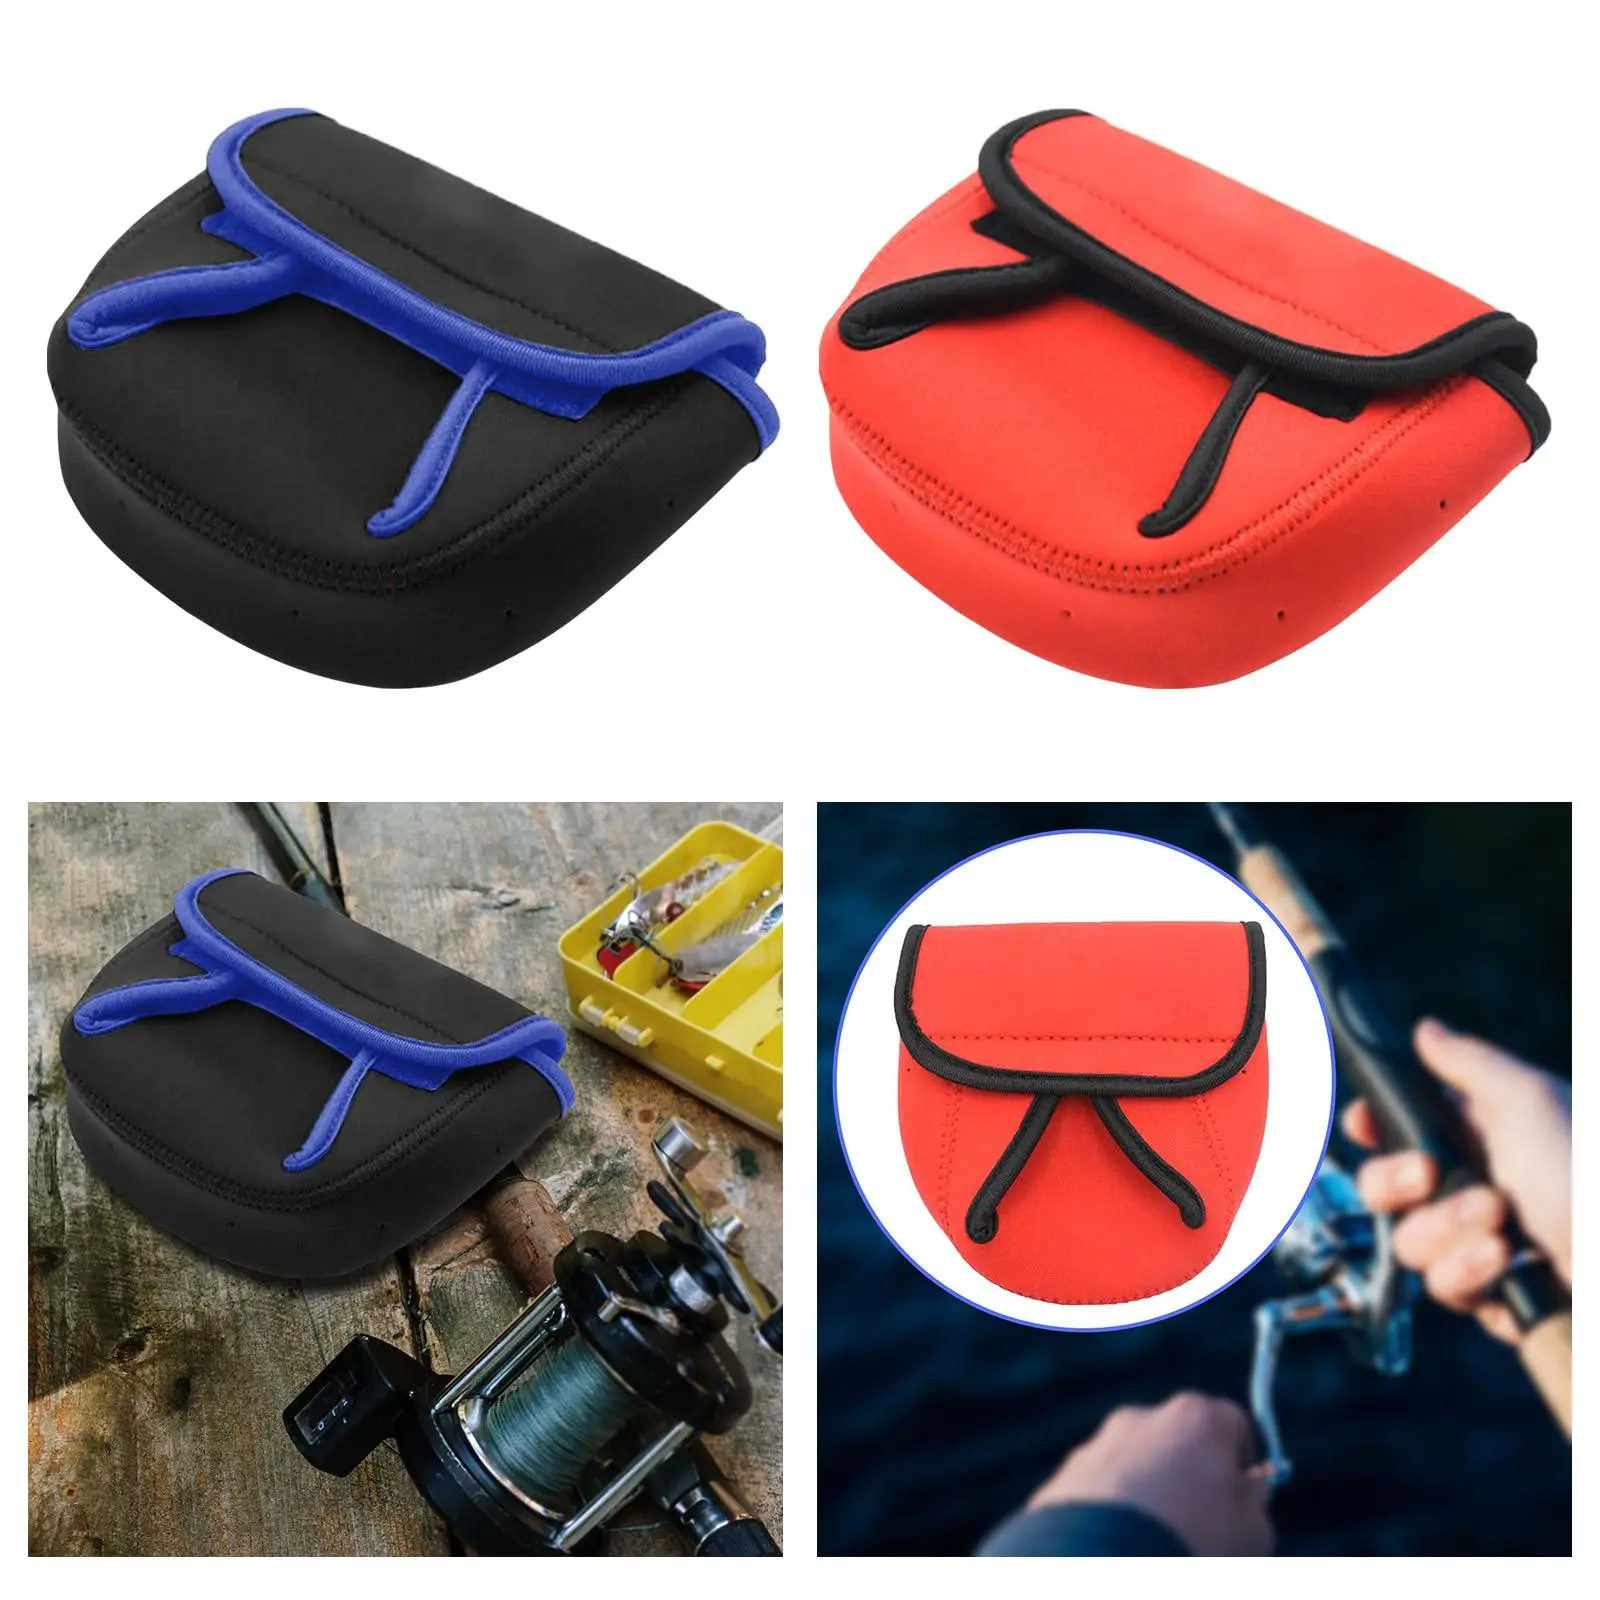 Fishing Reel Cover Pouch Bag Durable Storage Bag Fishing Gear Accessories Outdoor Fishing Bag Water Resistant Container Neoprene